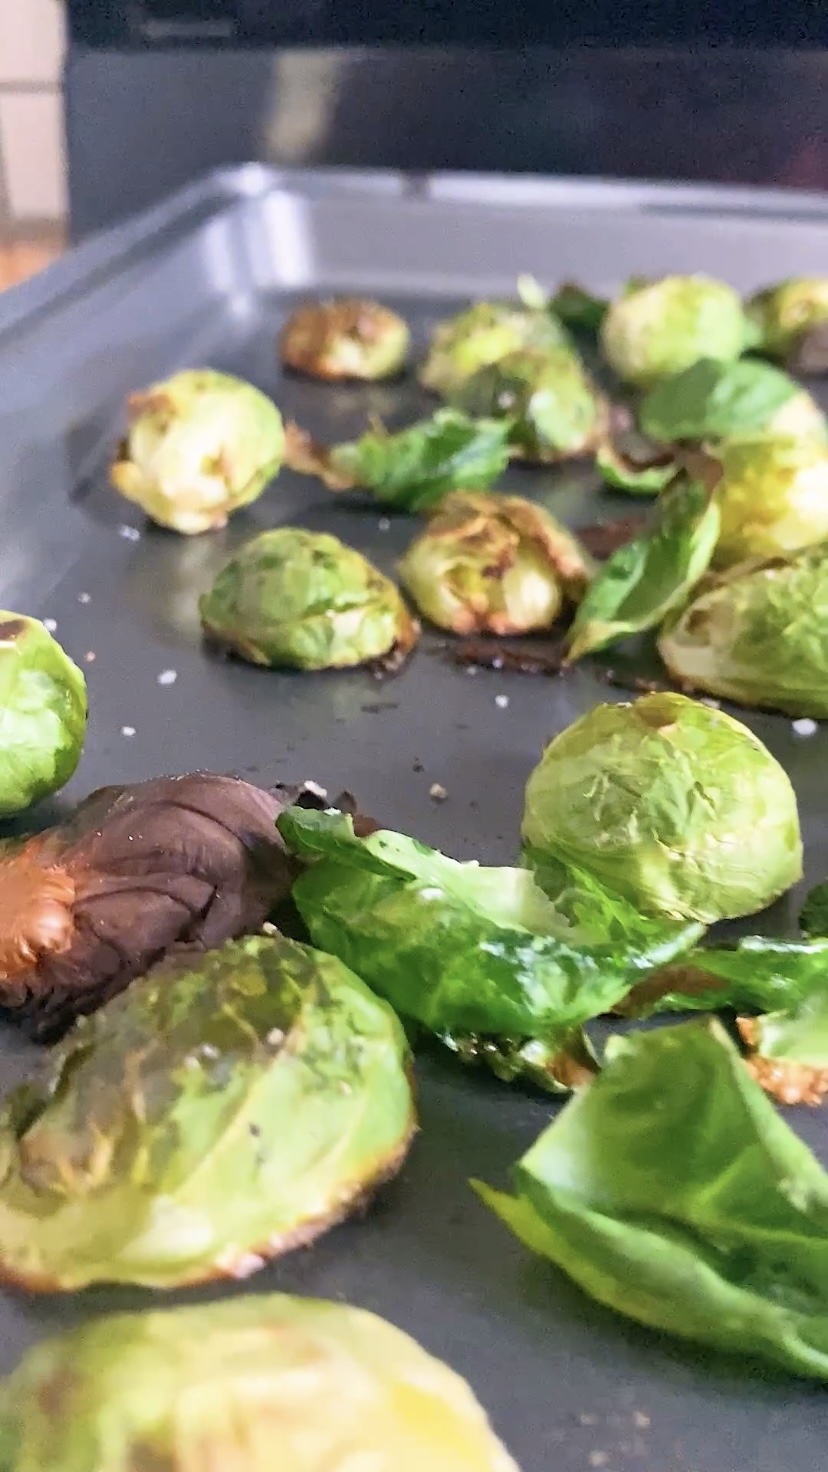 Roasted Brussels sprouts on a baking sheet.